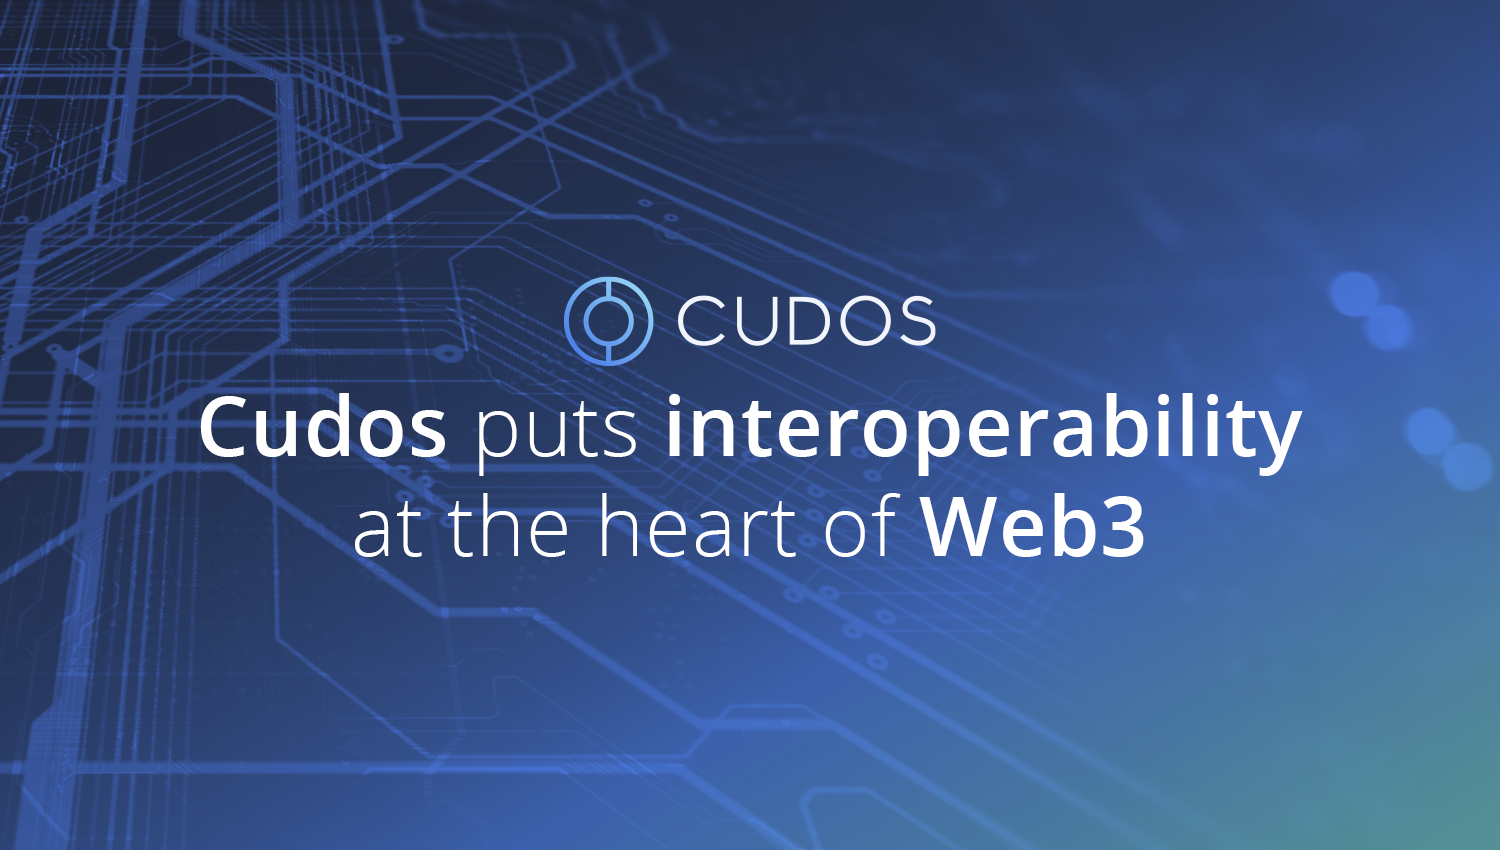 Cudos puts interoperability at the heart of Web3